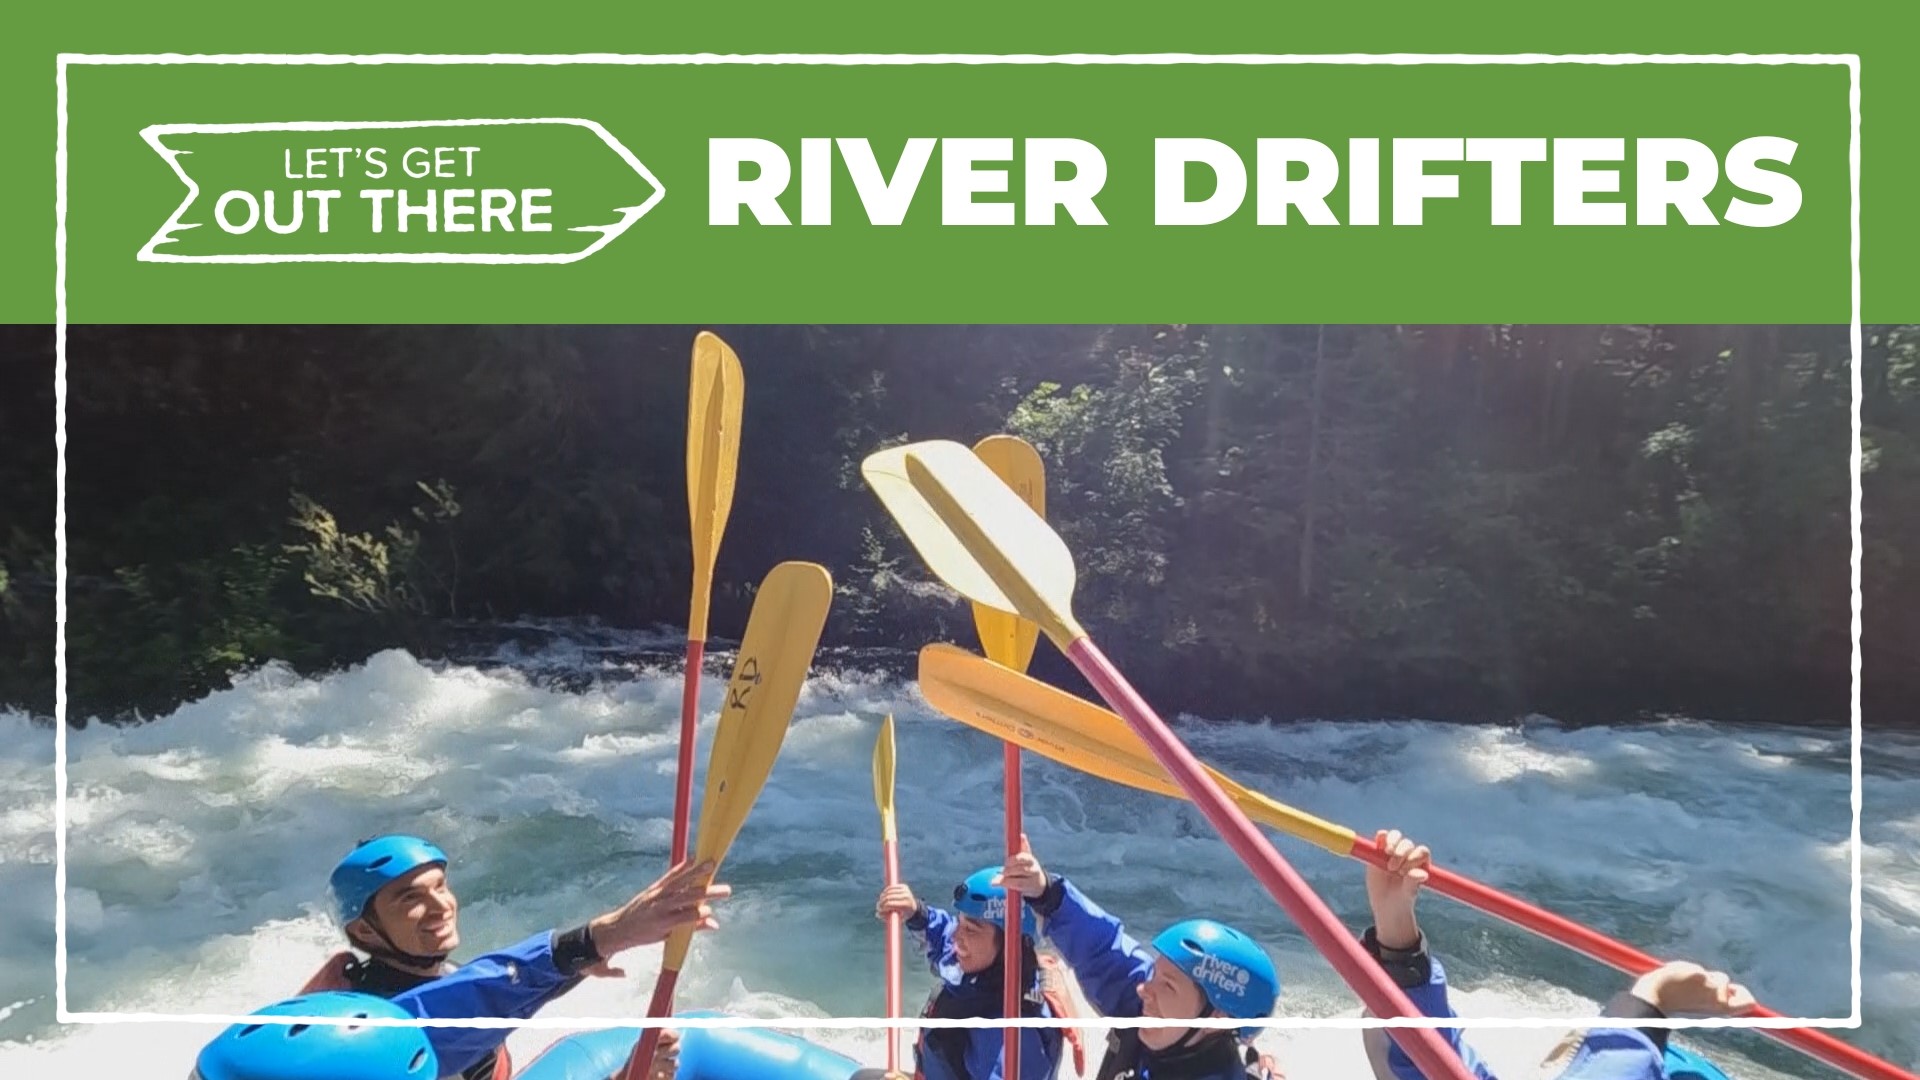 River Drifters guides rafting trips on several rivers in Oregon and Washington. No matter your age or skill level, there are great ways to get out there in a raft.